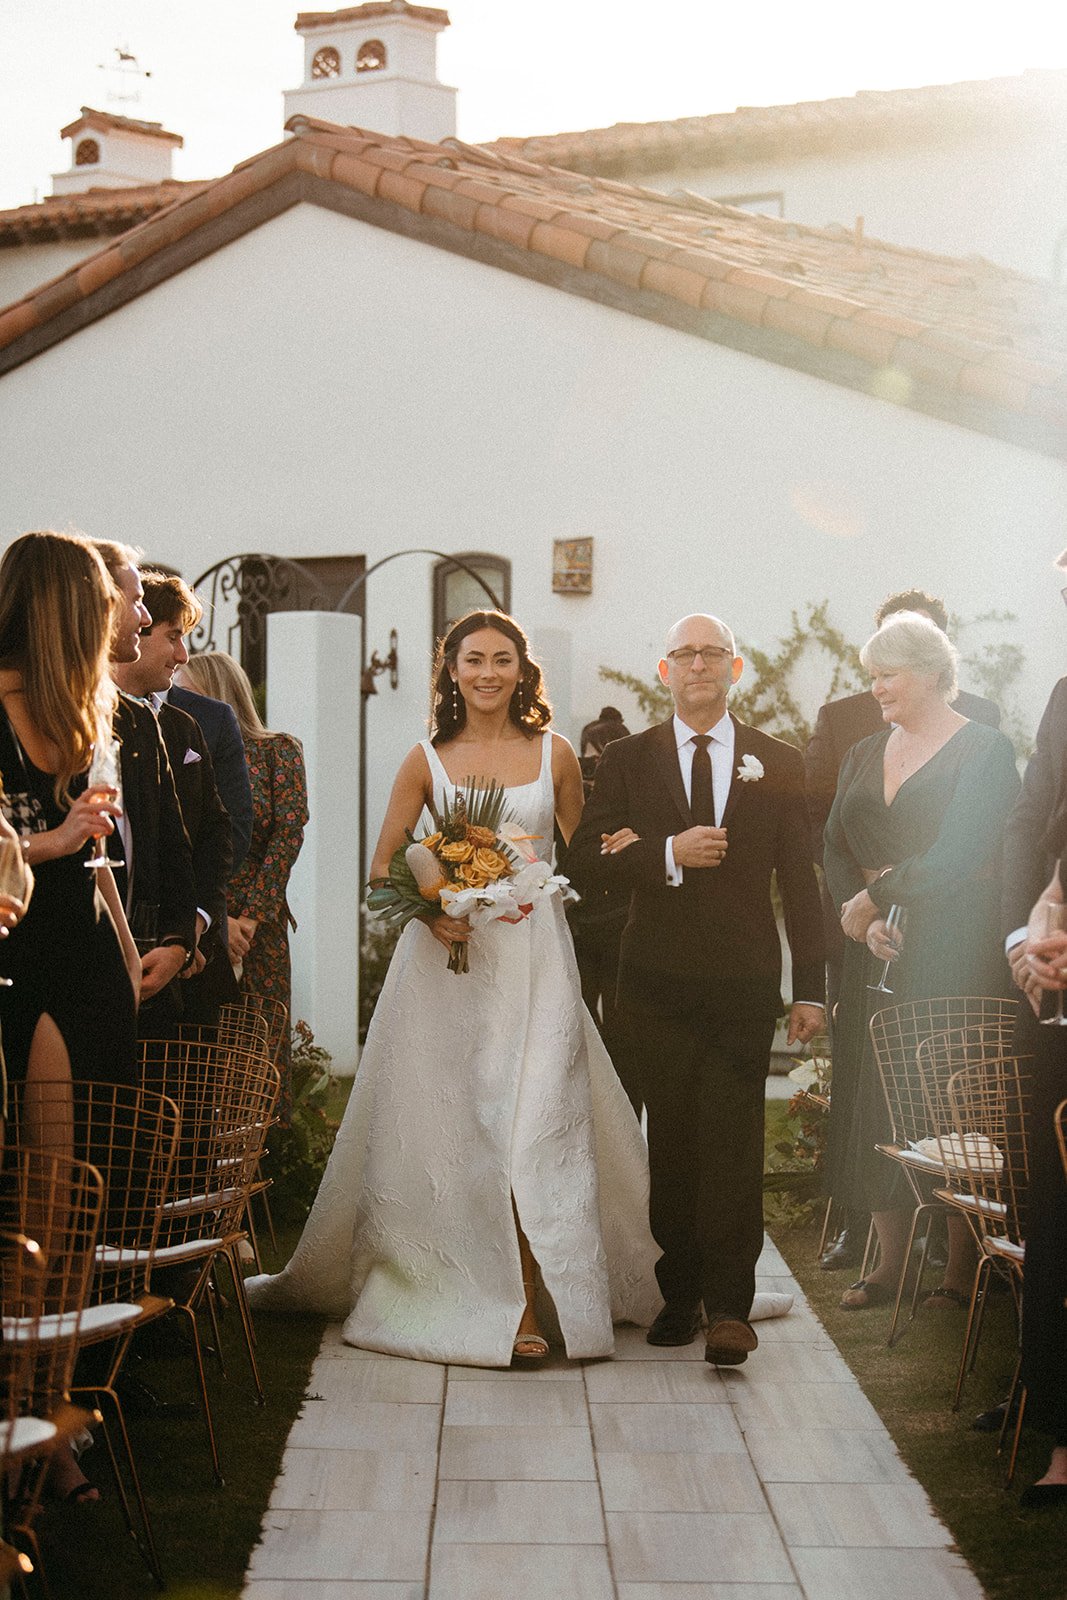  Father of the bride Anne Barge Coraline floral gown slit aisle walk  